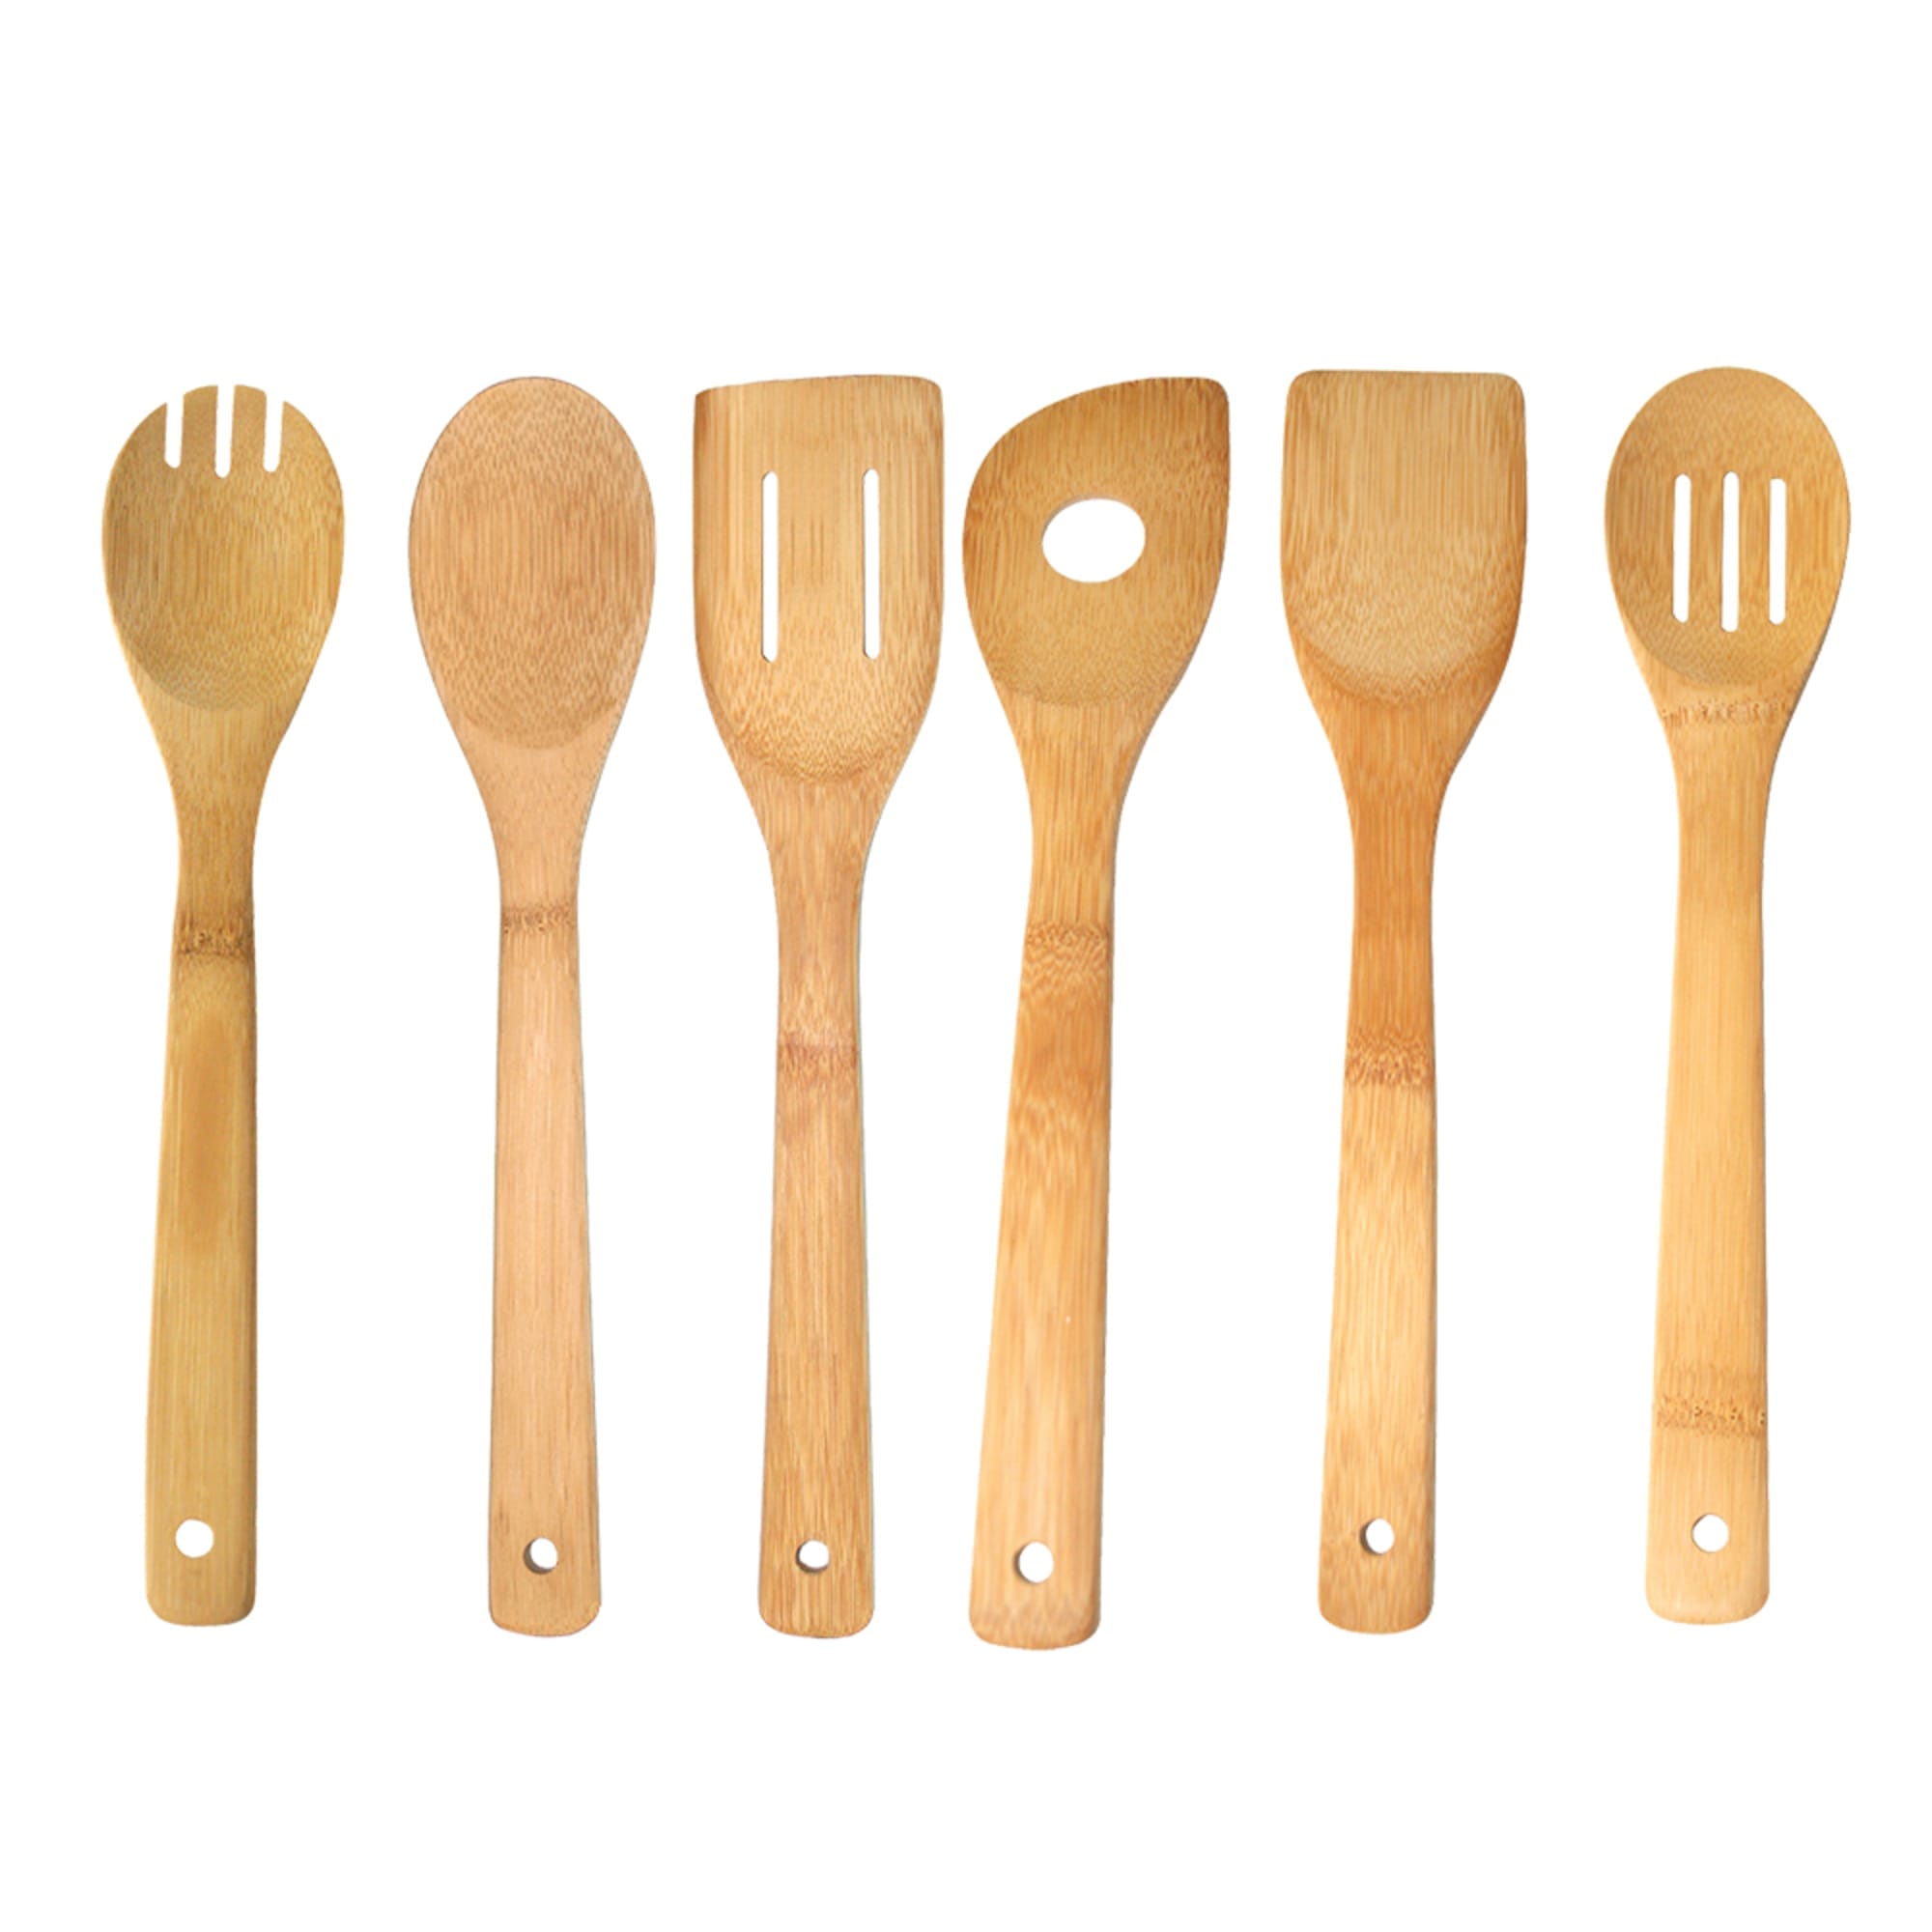 Home Basics 6 Piece Bamboo Kitchen Tool Set, Natural $3.00 EACH, CASE PACK OF 24